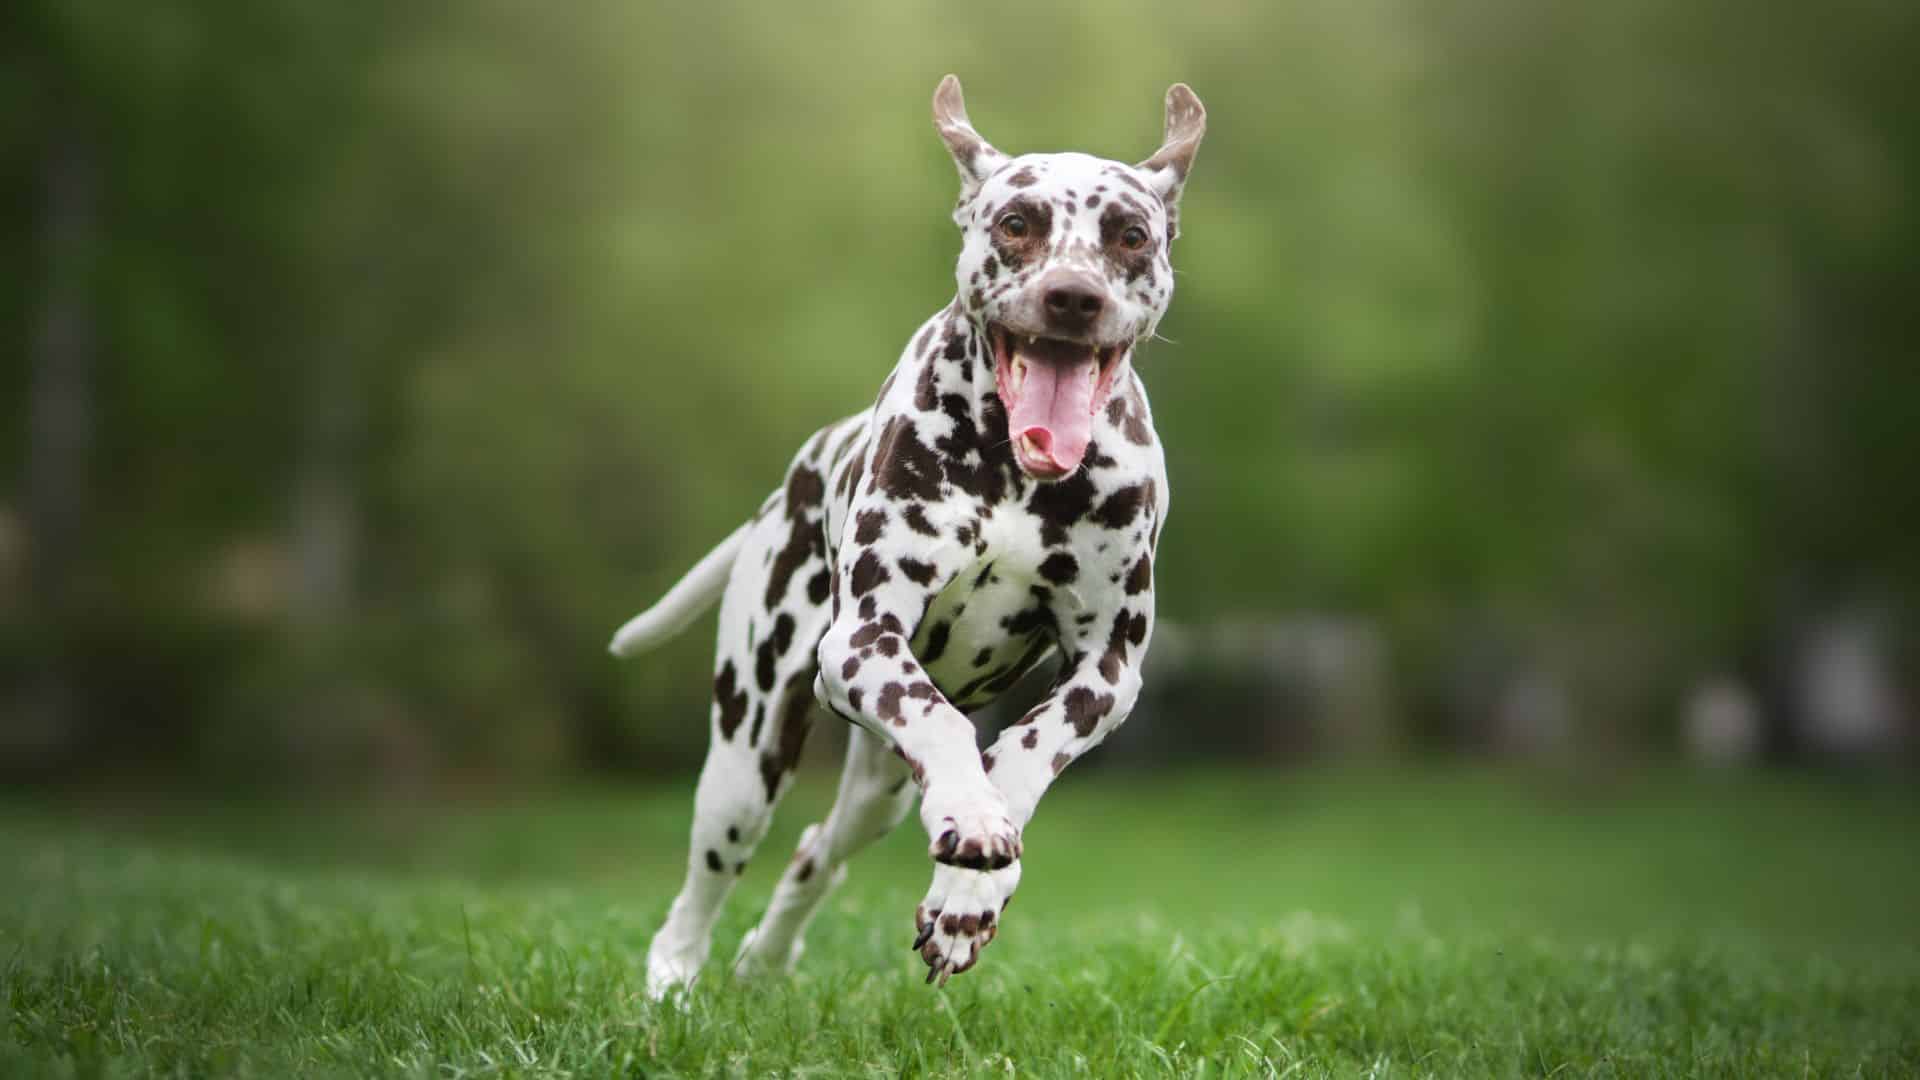 How to photograph a running dog